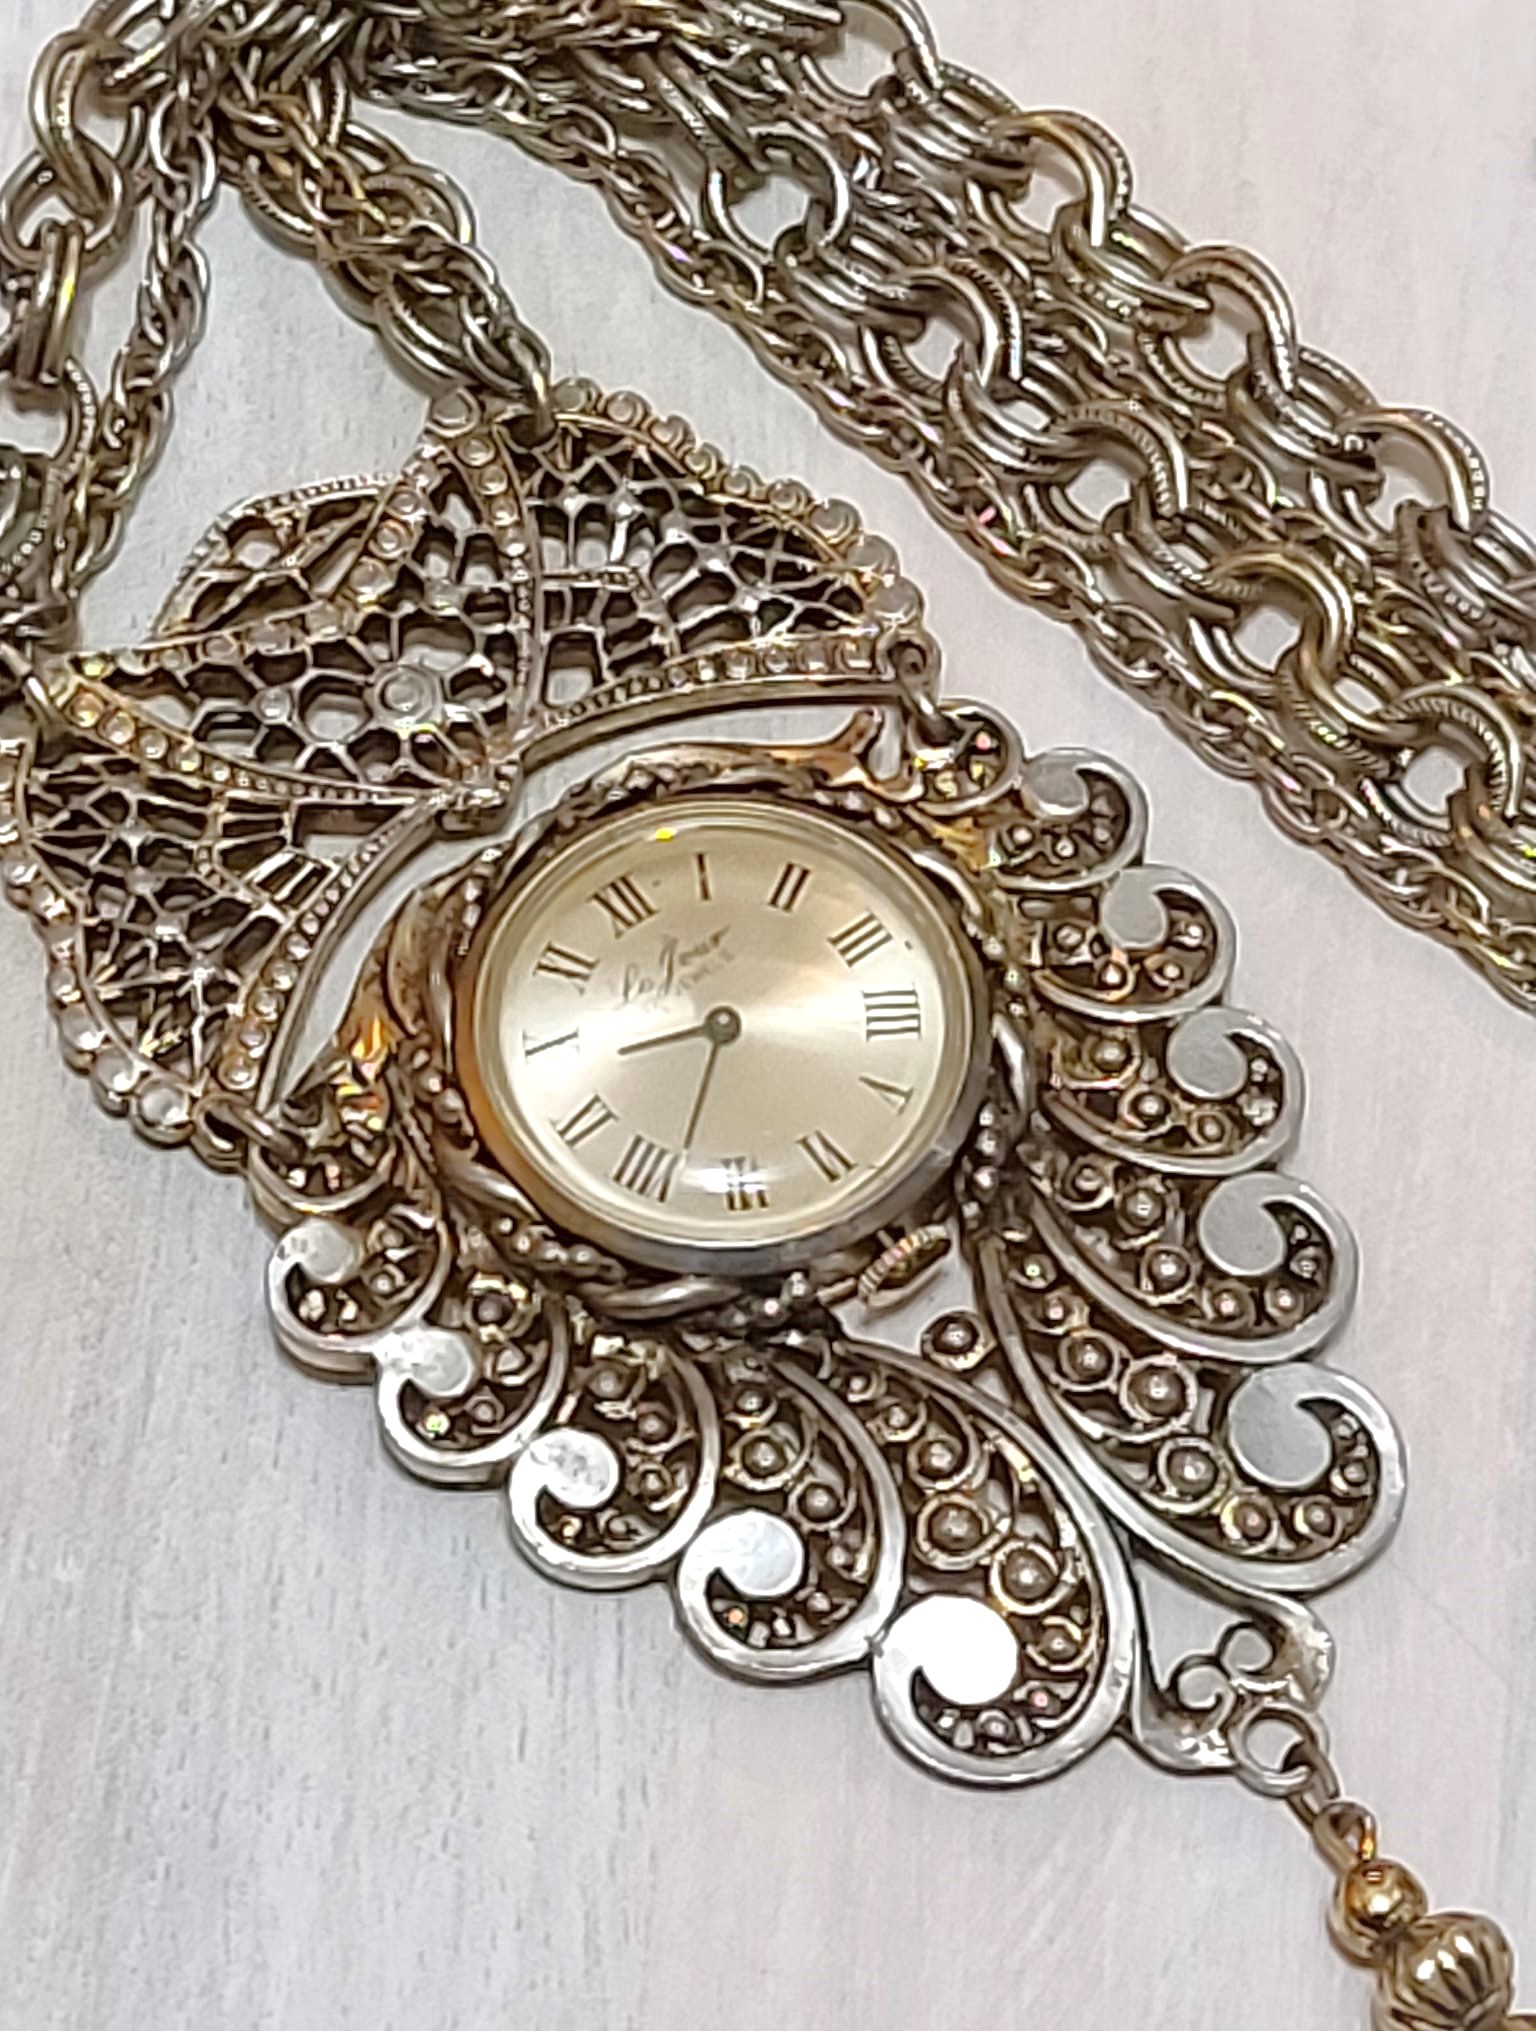 Le Jour 17 Jewels pendant watch necklace with multi strand chain